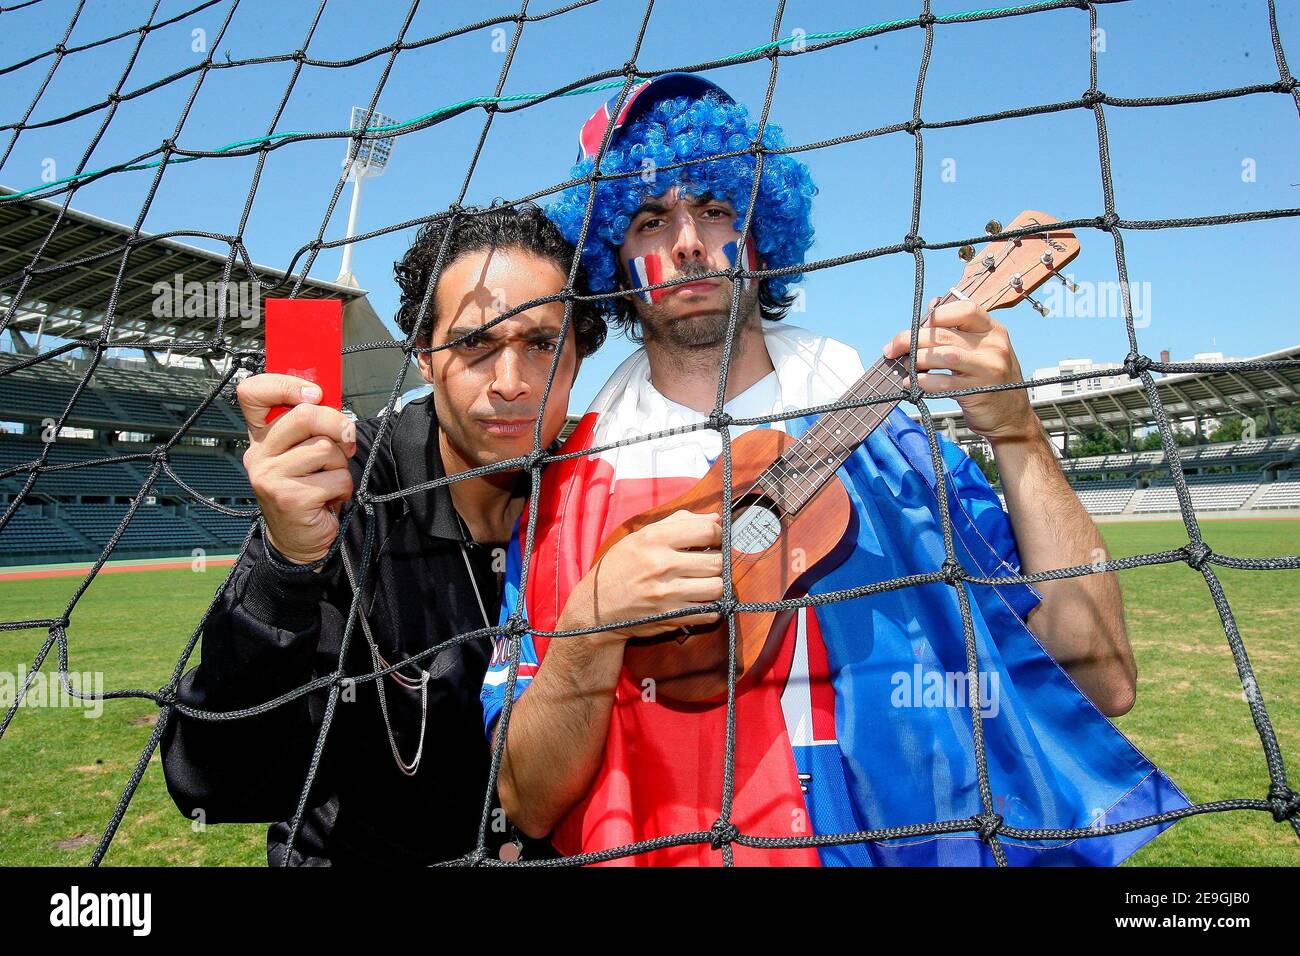 French singer Franck Lascombes (Glasses and black referre costume) is singing on the set of the videoclip 'Coup de Boule' (Headbutt) at Charlety Stadium, Paris, France on July 15, 2006.He is playing in the clip with 'Plage Records' President Sebastien Lipszyc (Blue Hair), owner of the music. This videoclip is a parody of France's Zinedine Zidane headbutt against Italy's Marco Materazzi which led to Zidane being sent-off during the FIFA World Cup Final at the Olympiastadion in Berlin. Photo by Mehdi Taamallah/ABACAPRESS.COM Stock Photo